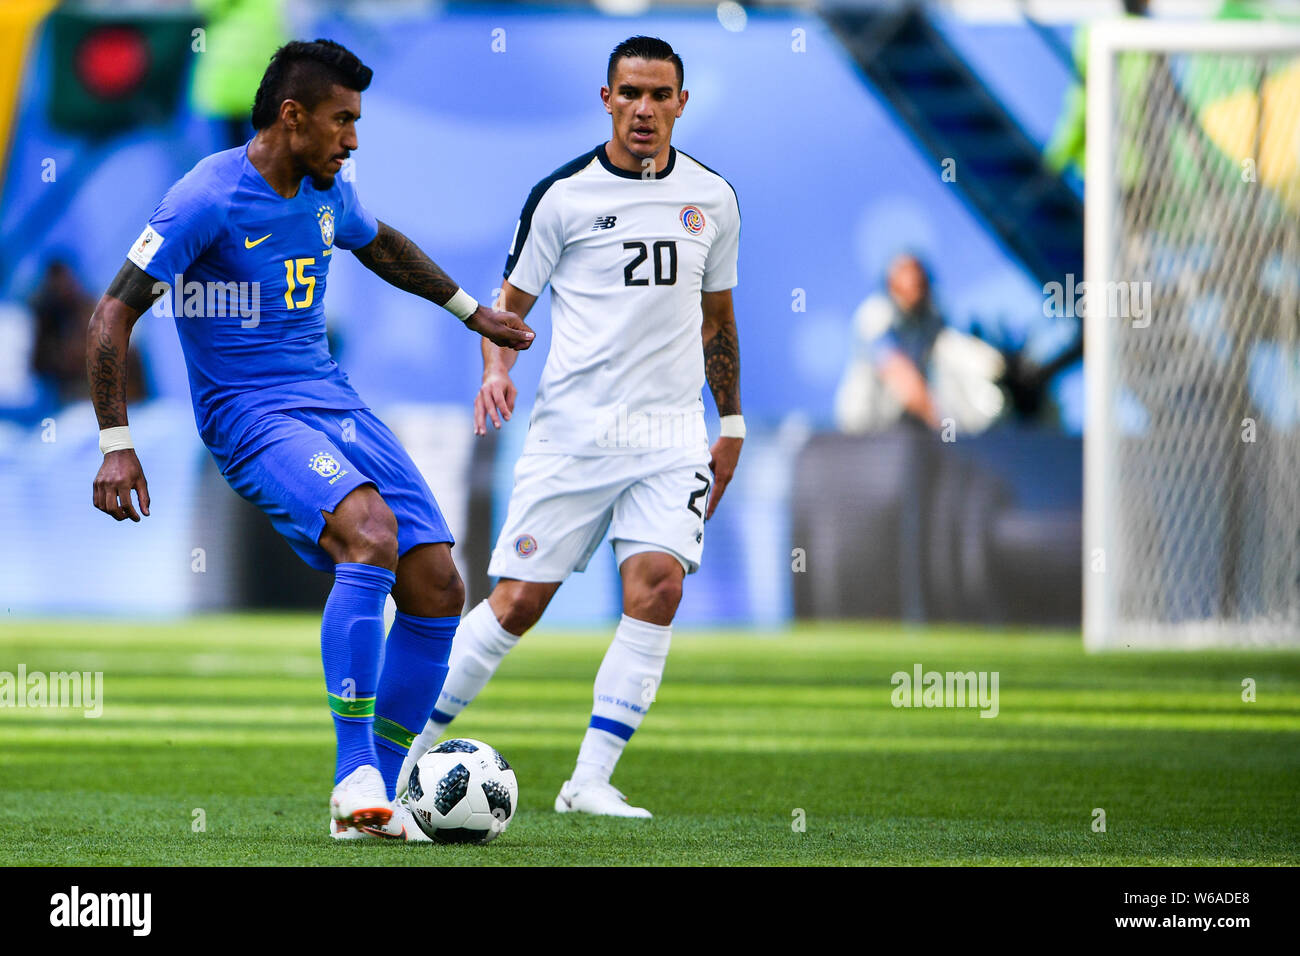 Paulinho, left, of Brazil dribbles against David Guzman of Costa Rica in their Group E match during the FIFA World Cup 2018 in Saint Petersburg, Russi Stock Photo